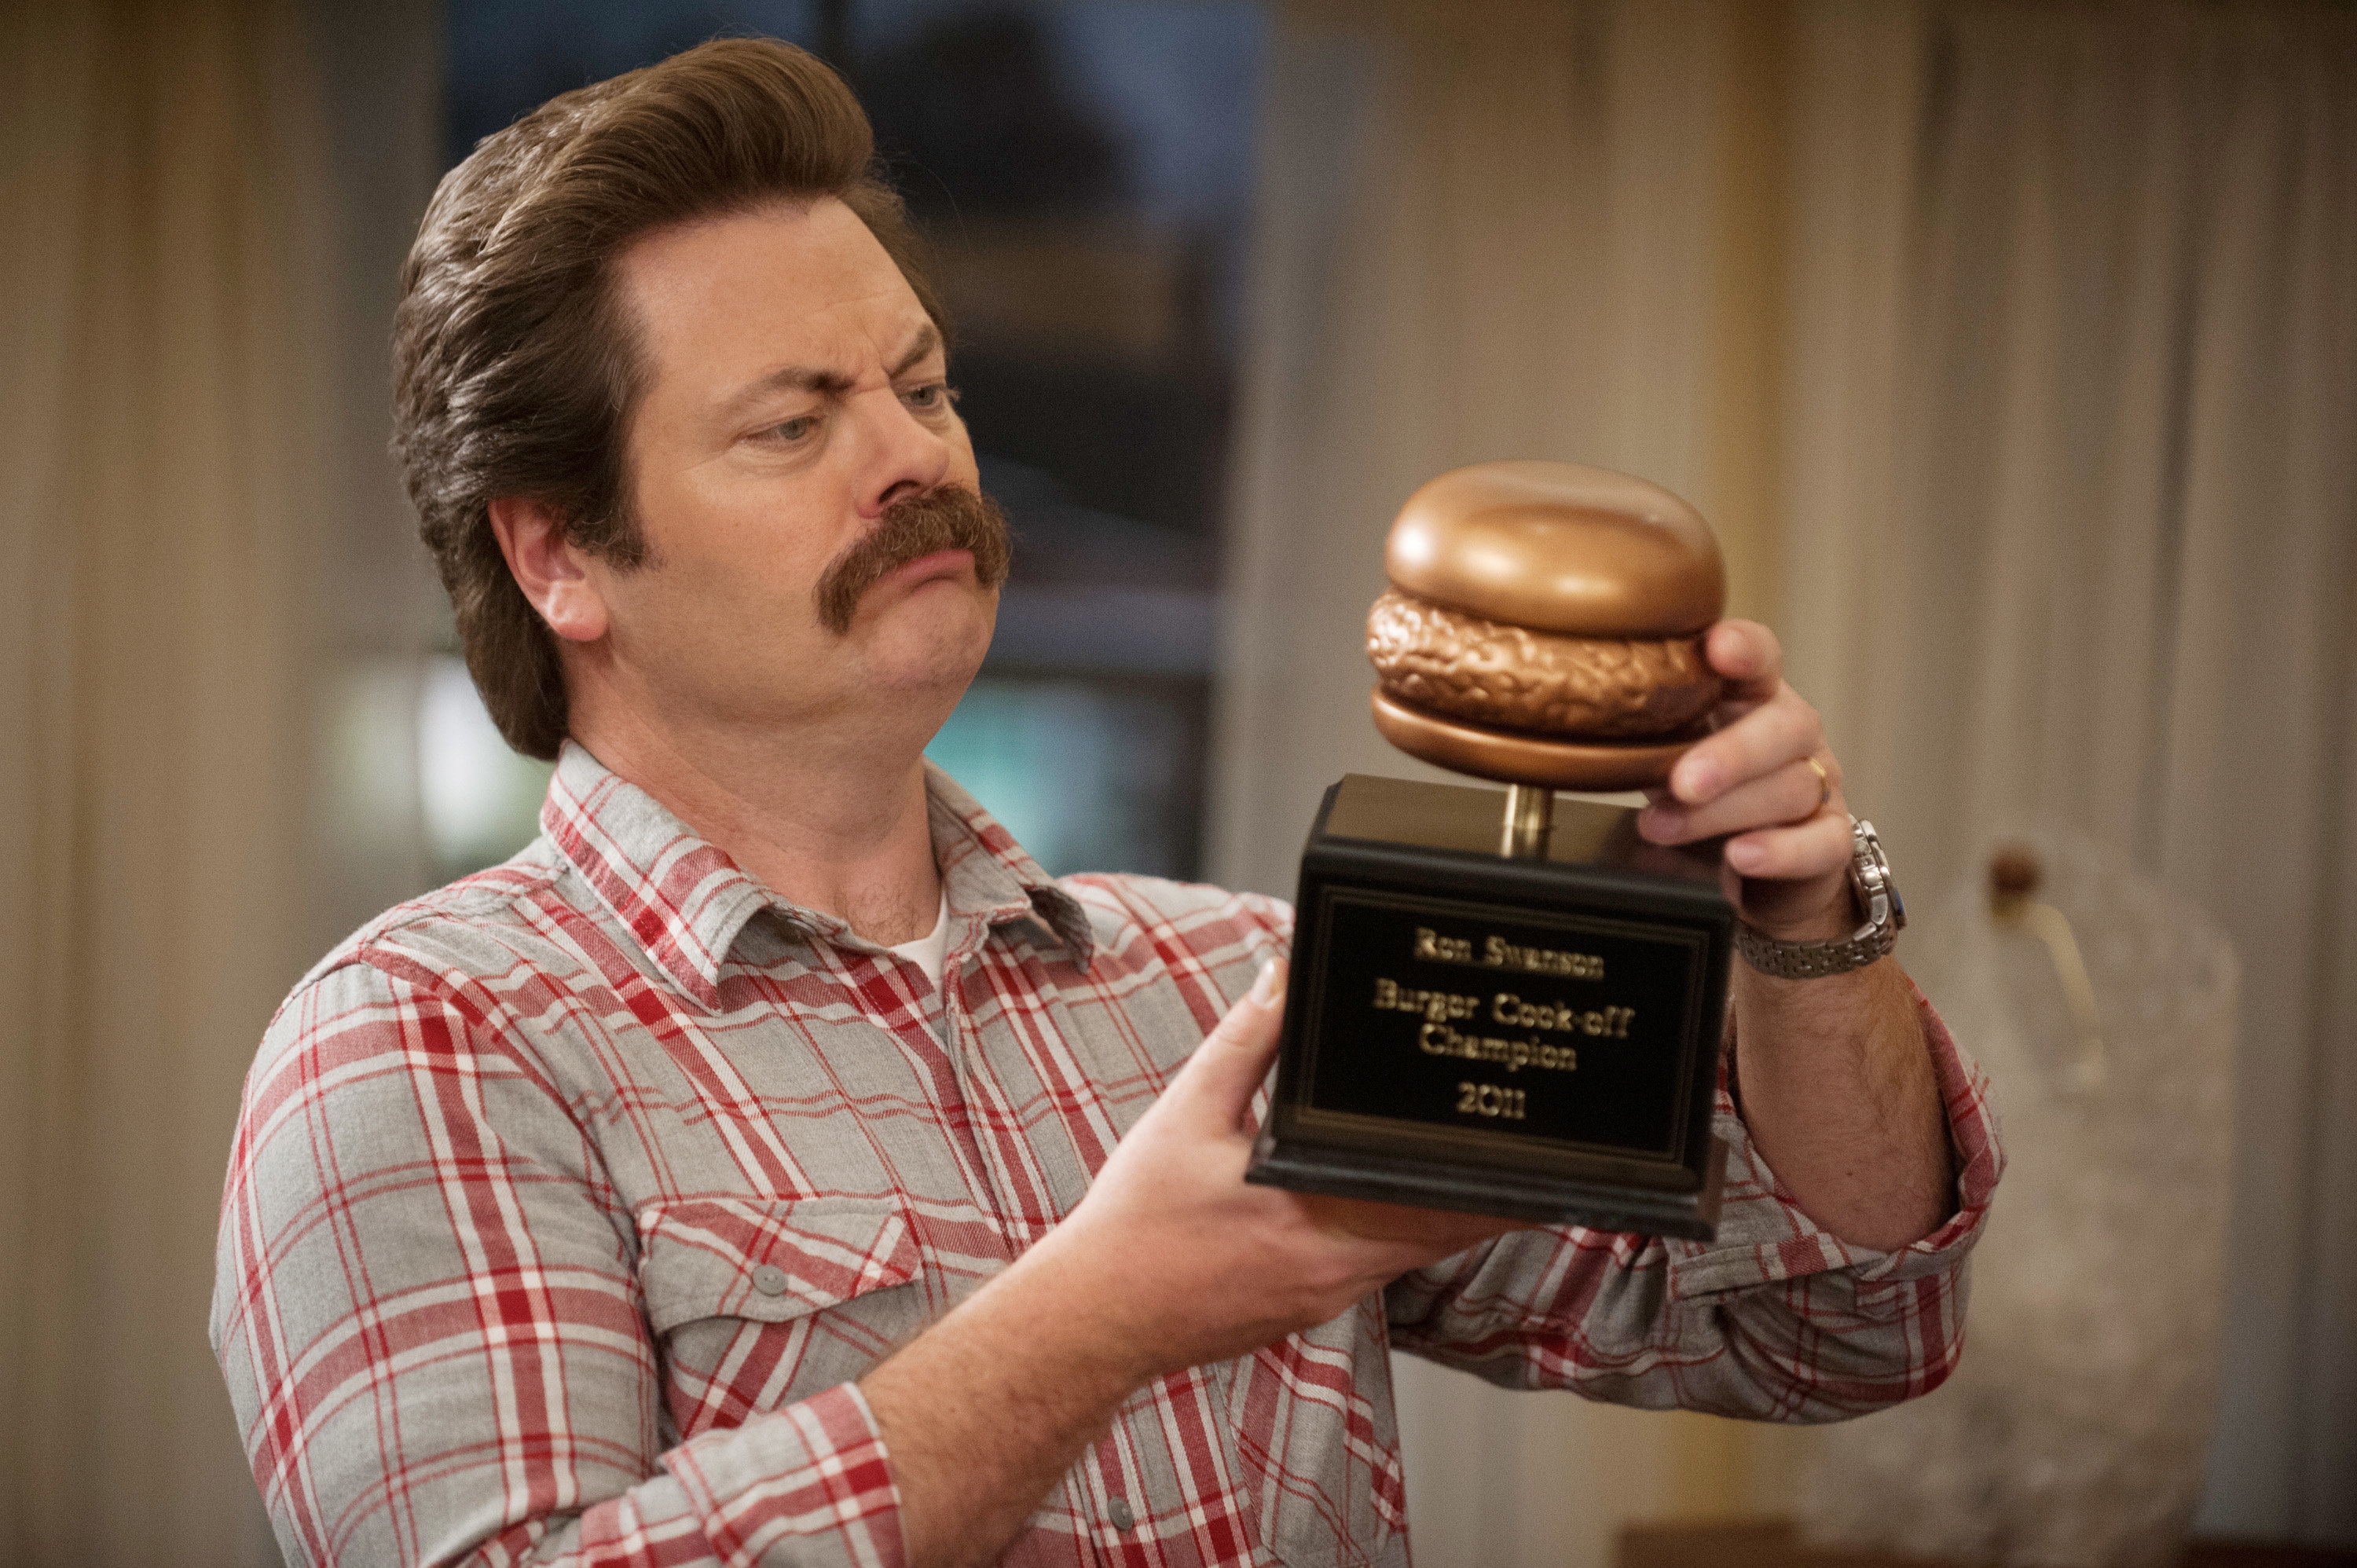 Ron holding a burger cook-off trophy